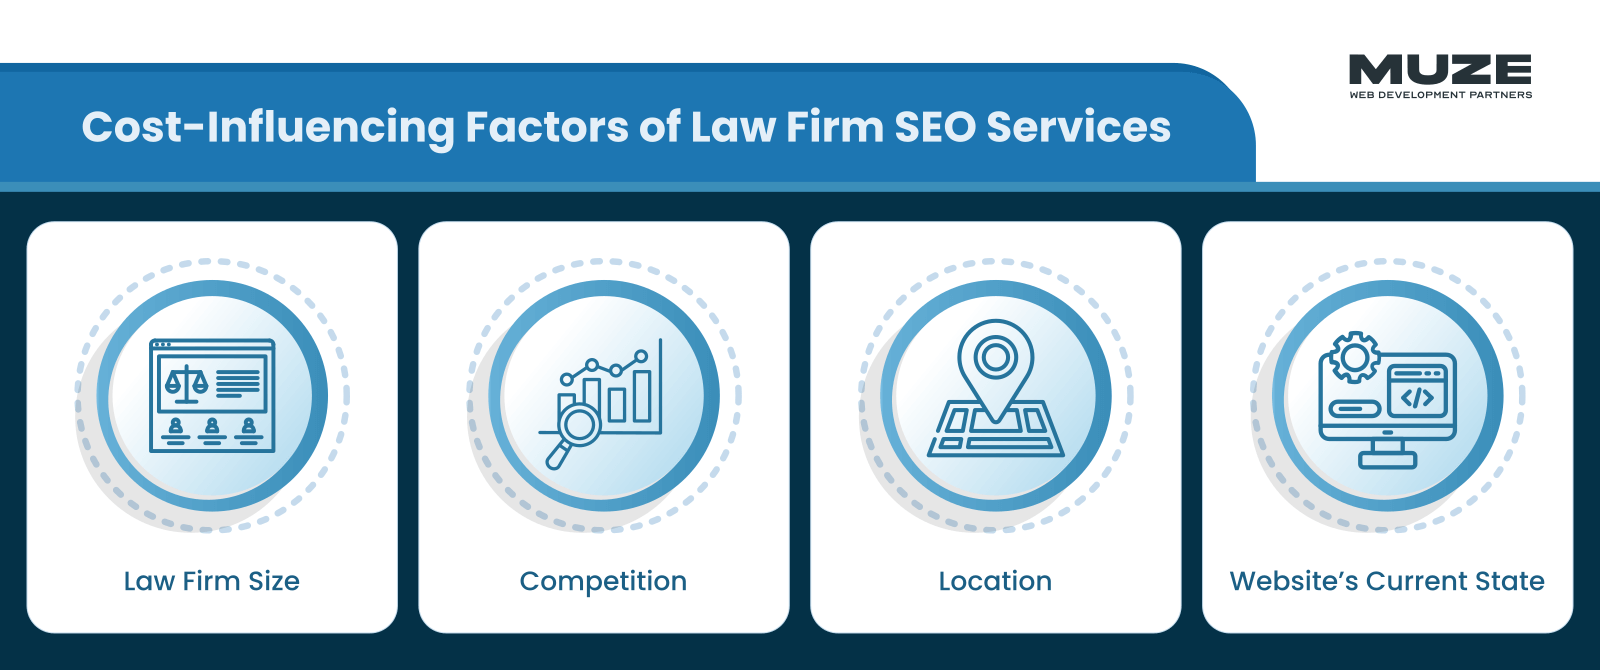 Cost-Influencing Factors of Law Firm SEO Services - Law Firm SEO Services